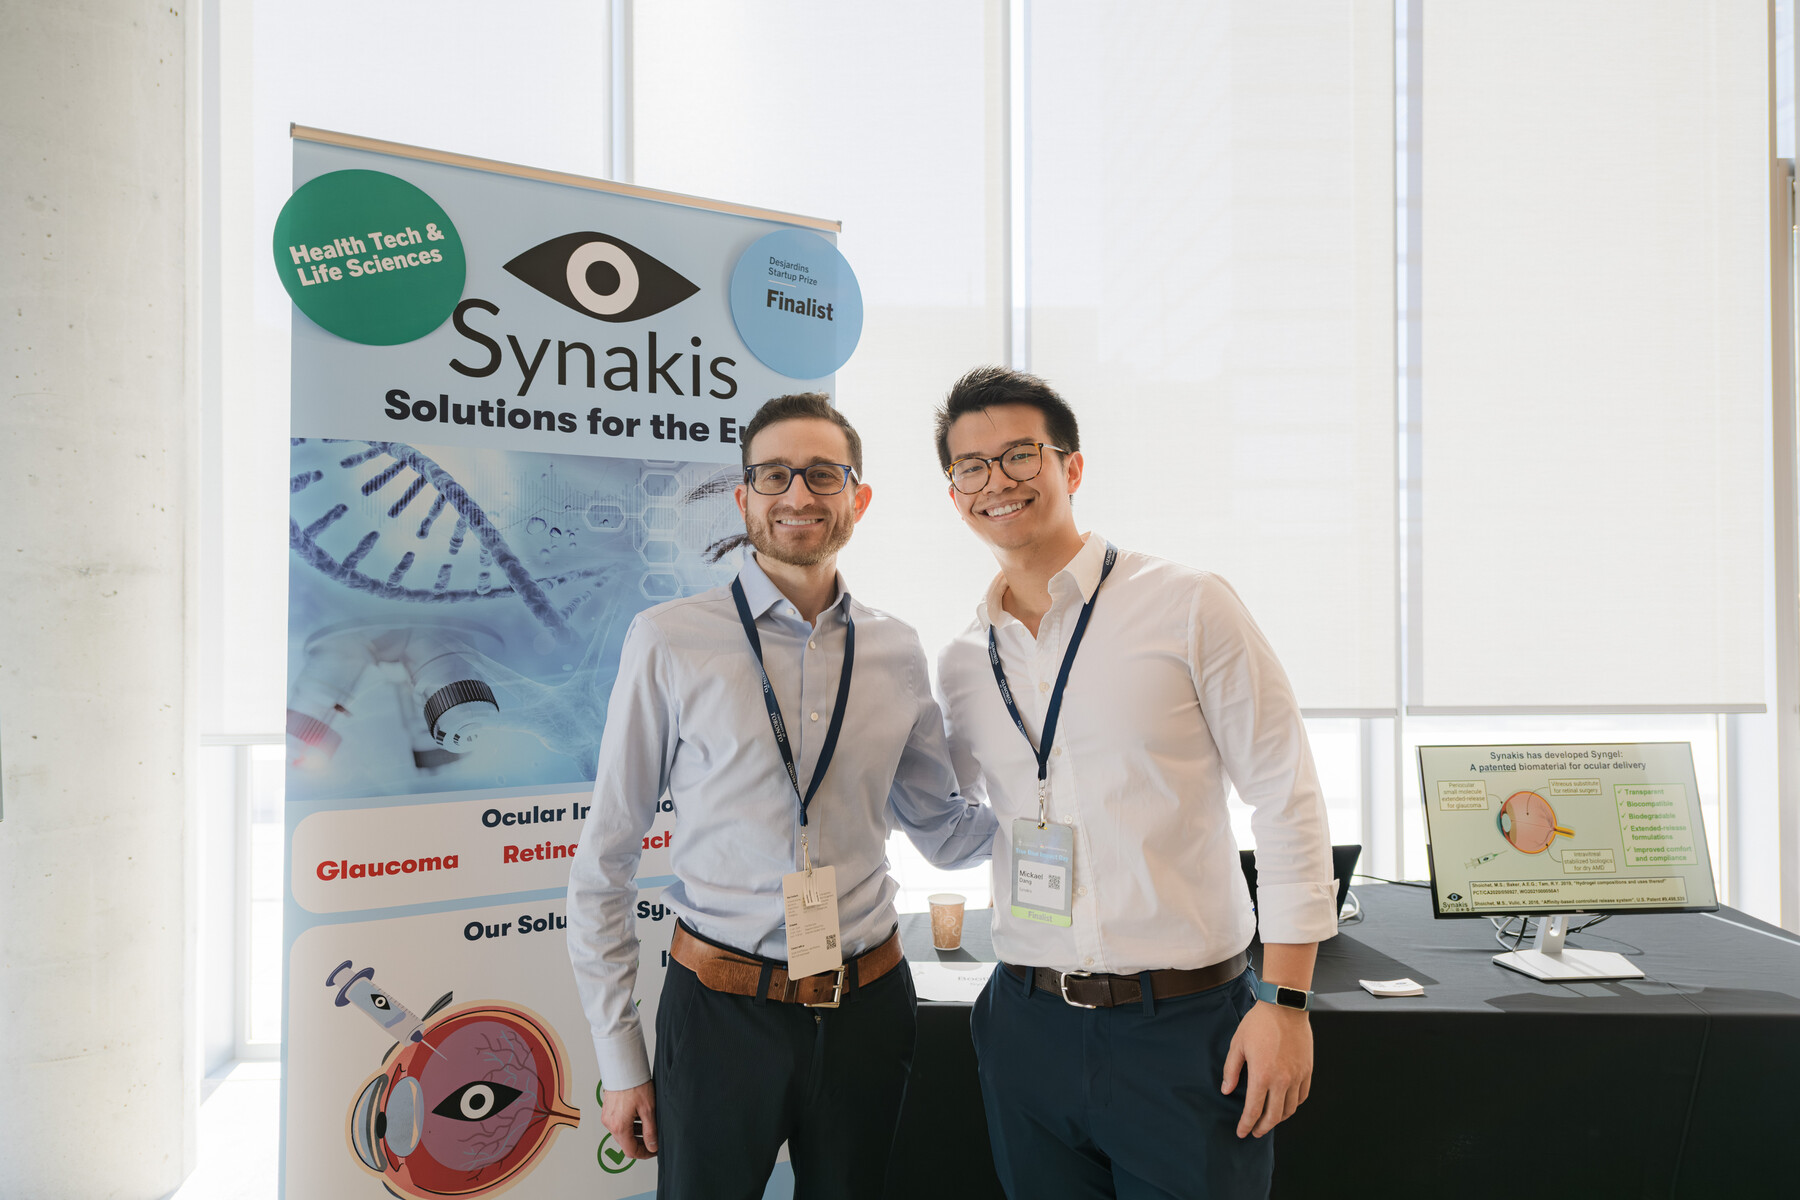 Two Synakis team members standing in front of a table and pull-up banner for their company